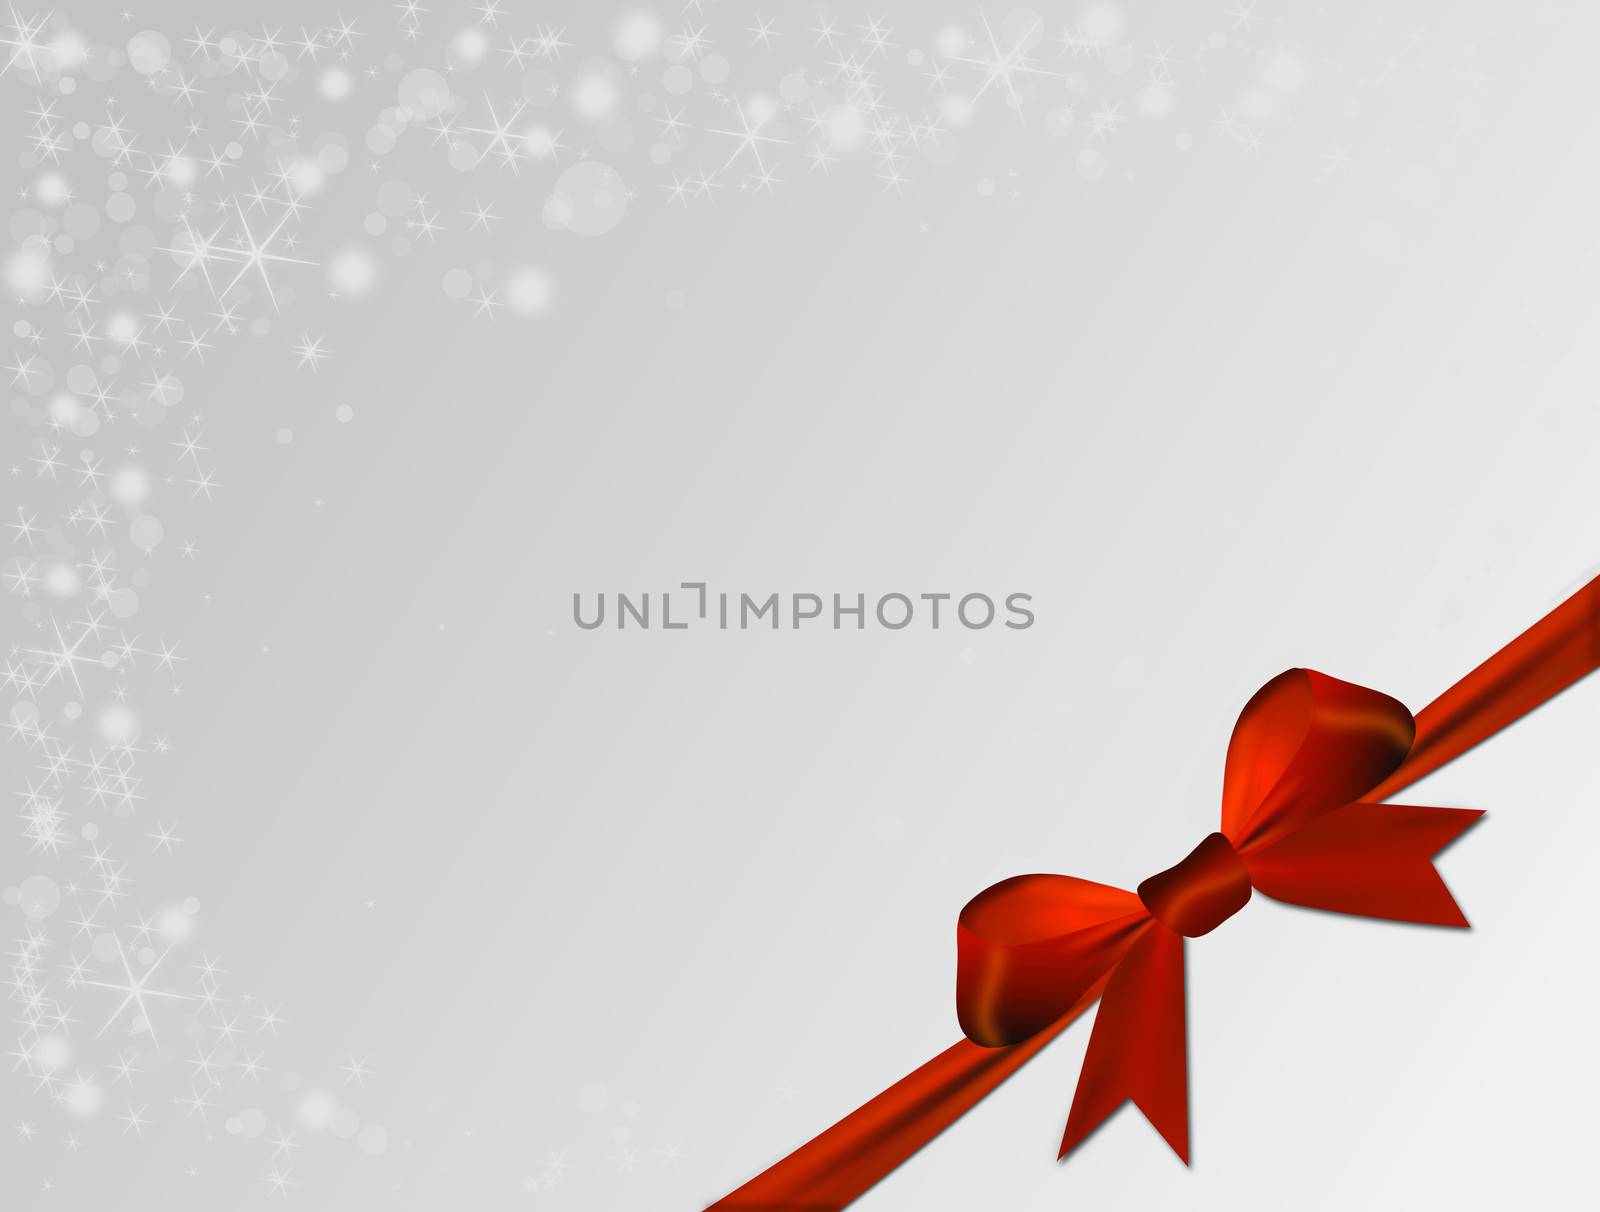 Silver Christmas background with red bow